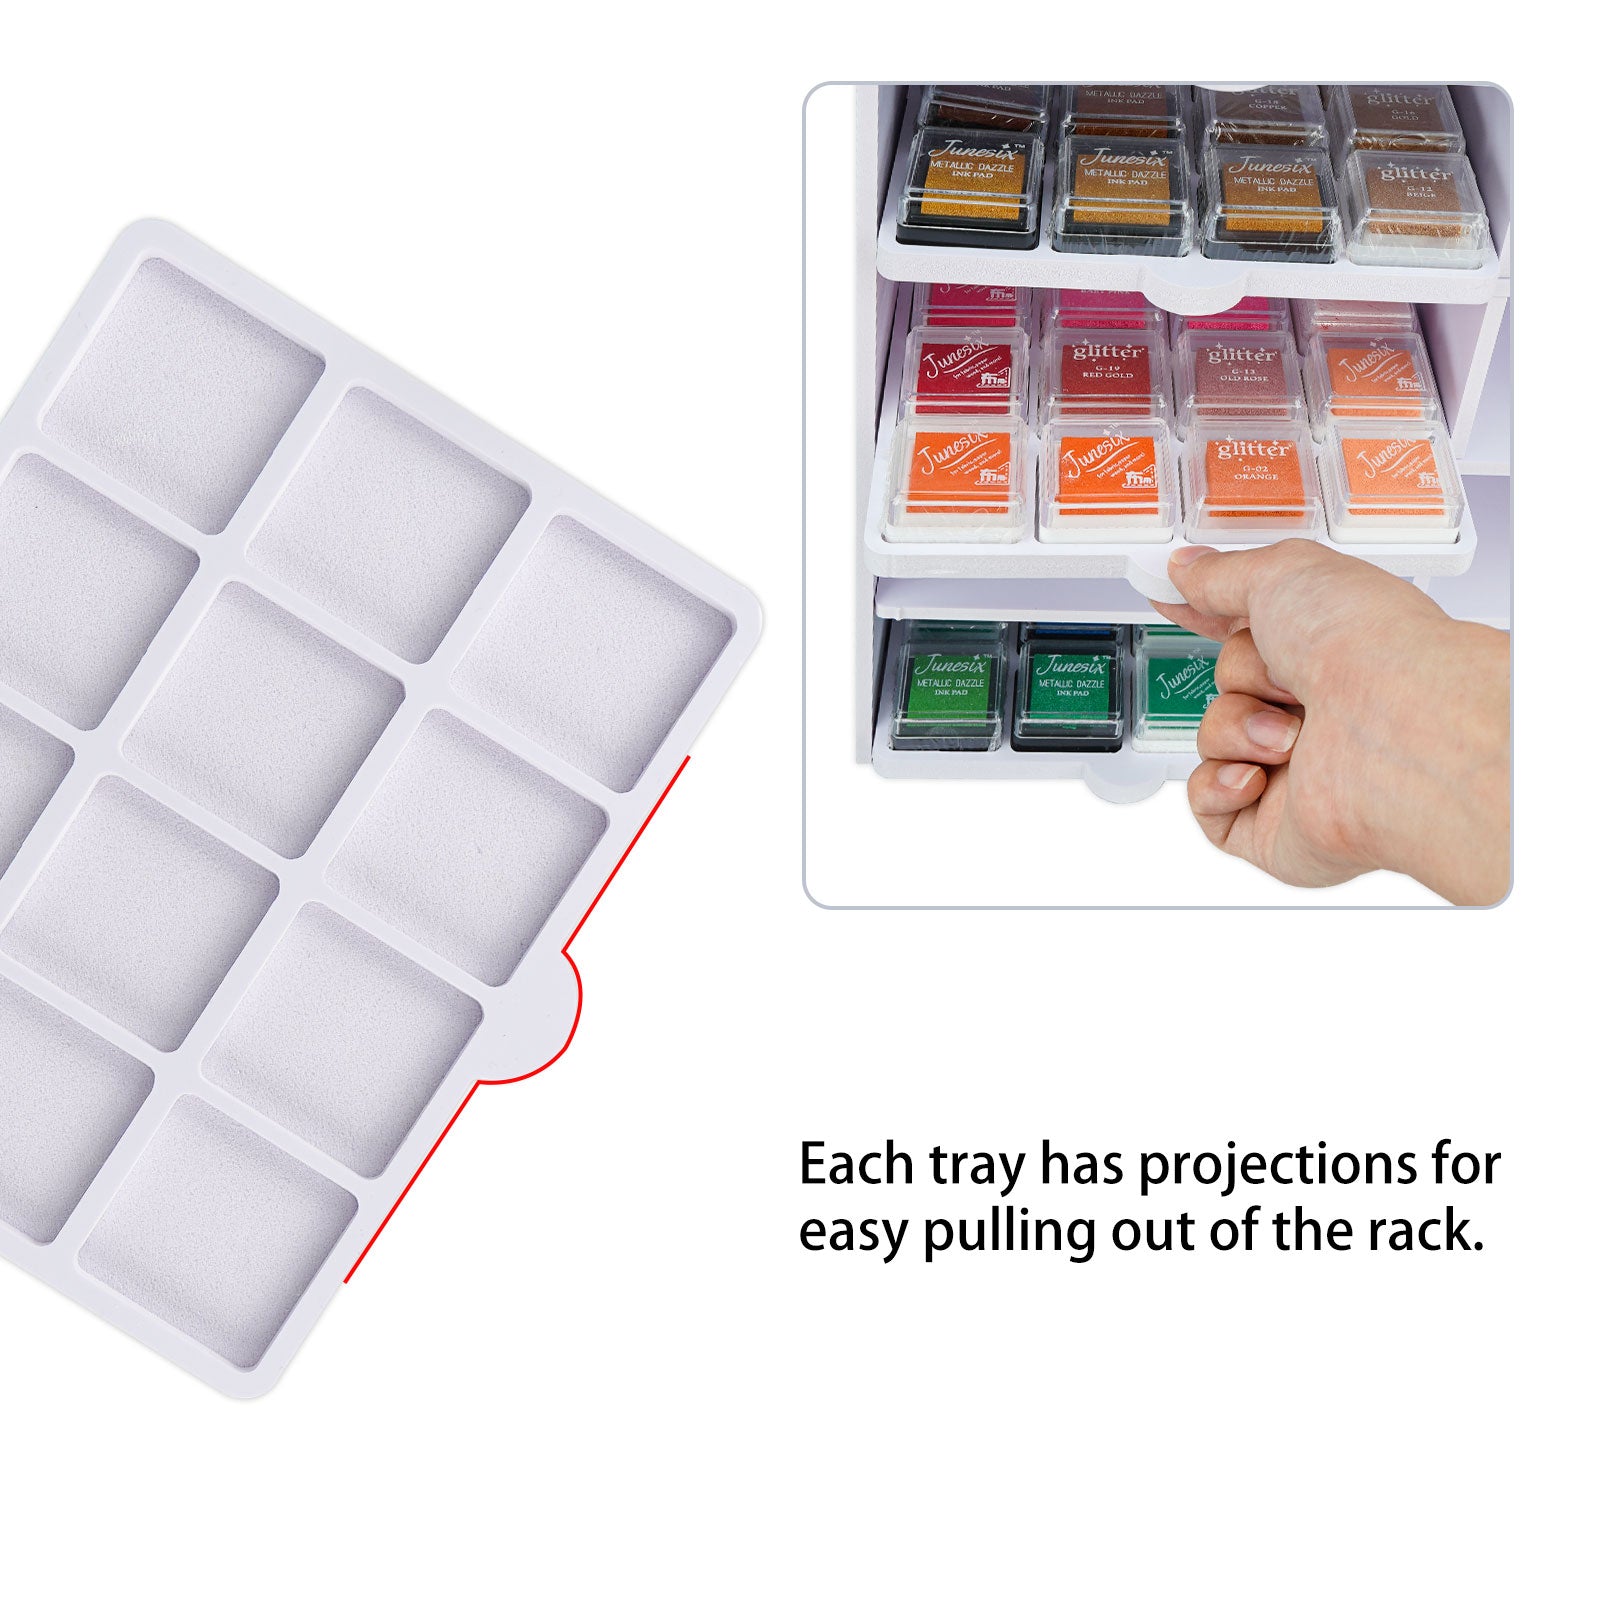 Each tray has progections for easy pulling out of the rack